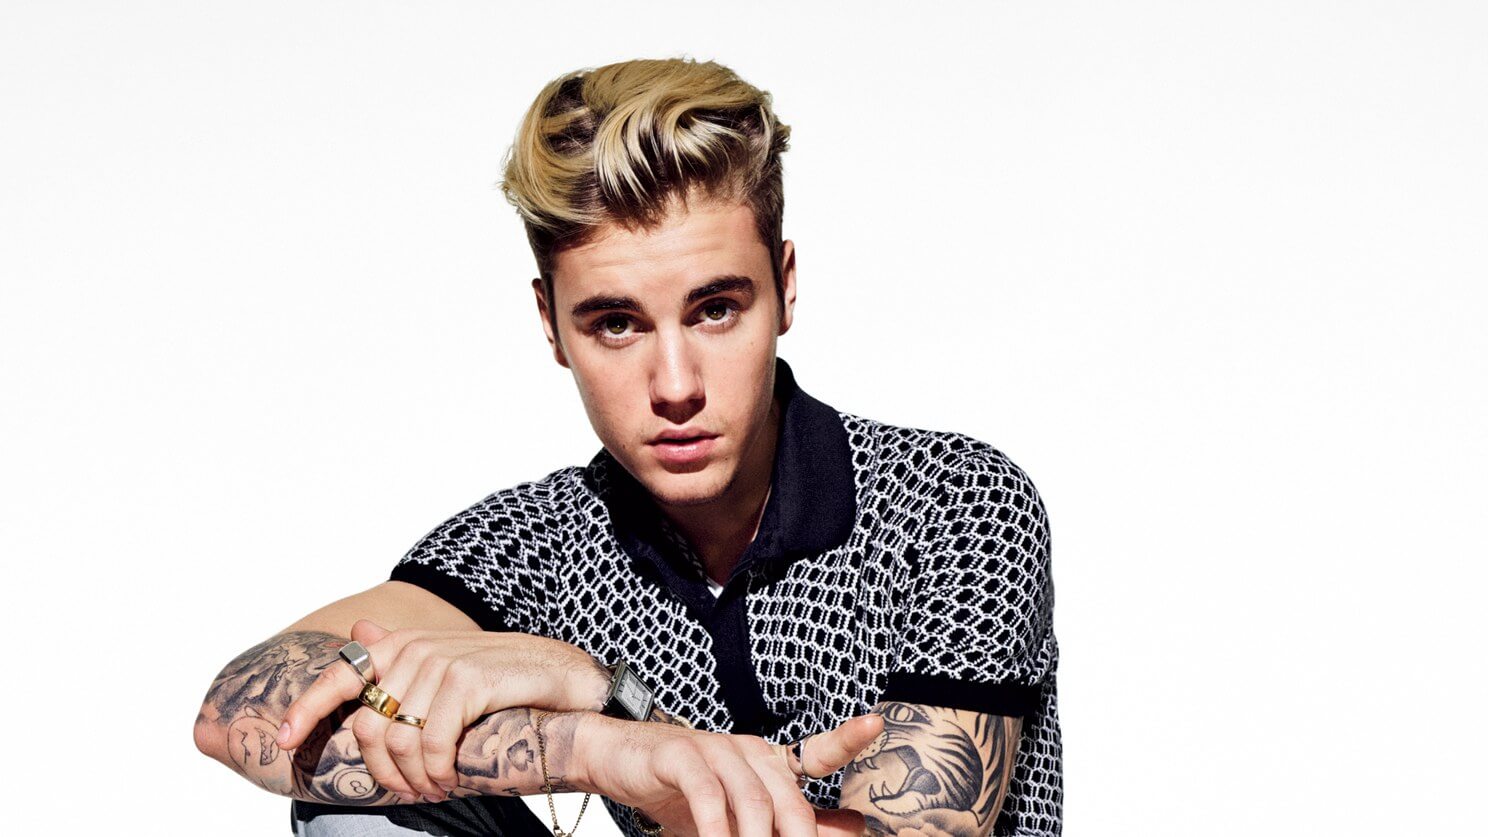 Justin Bieber may require court-ordered anger management, expert speculates